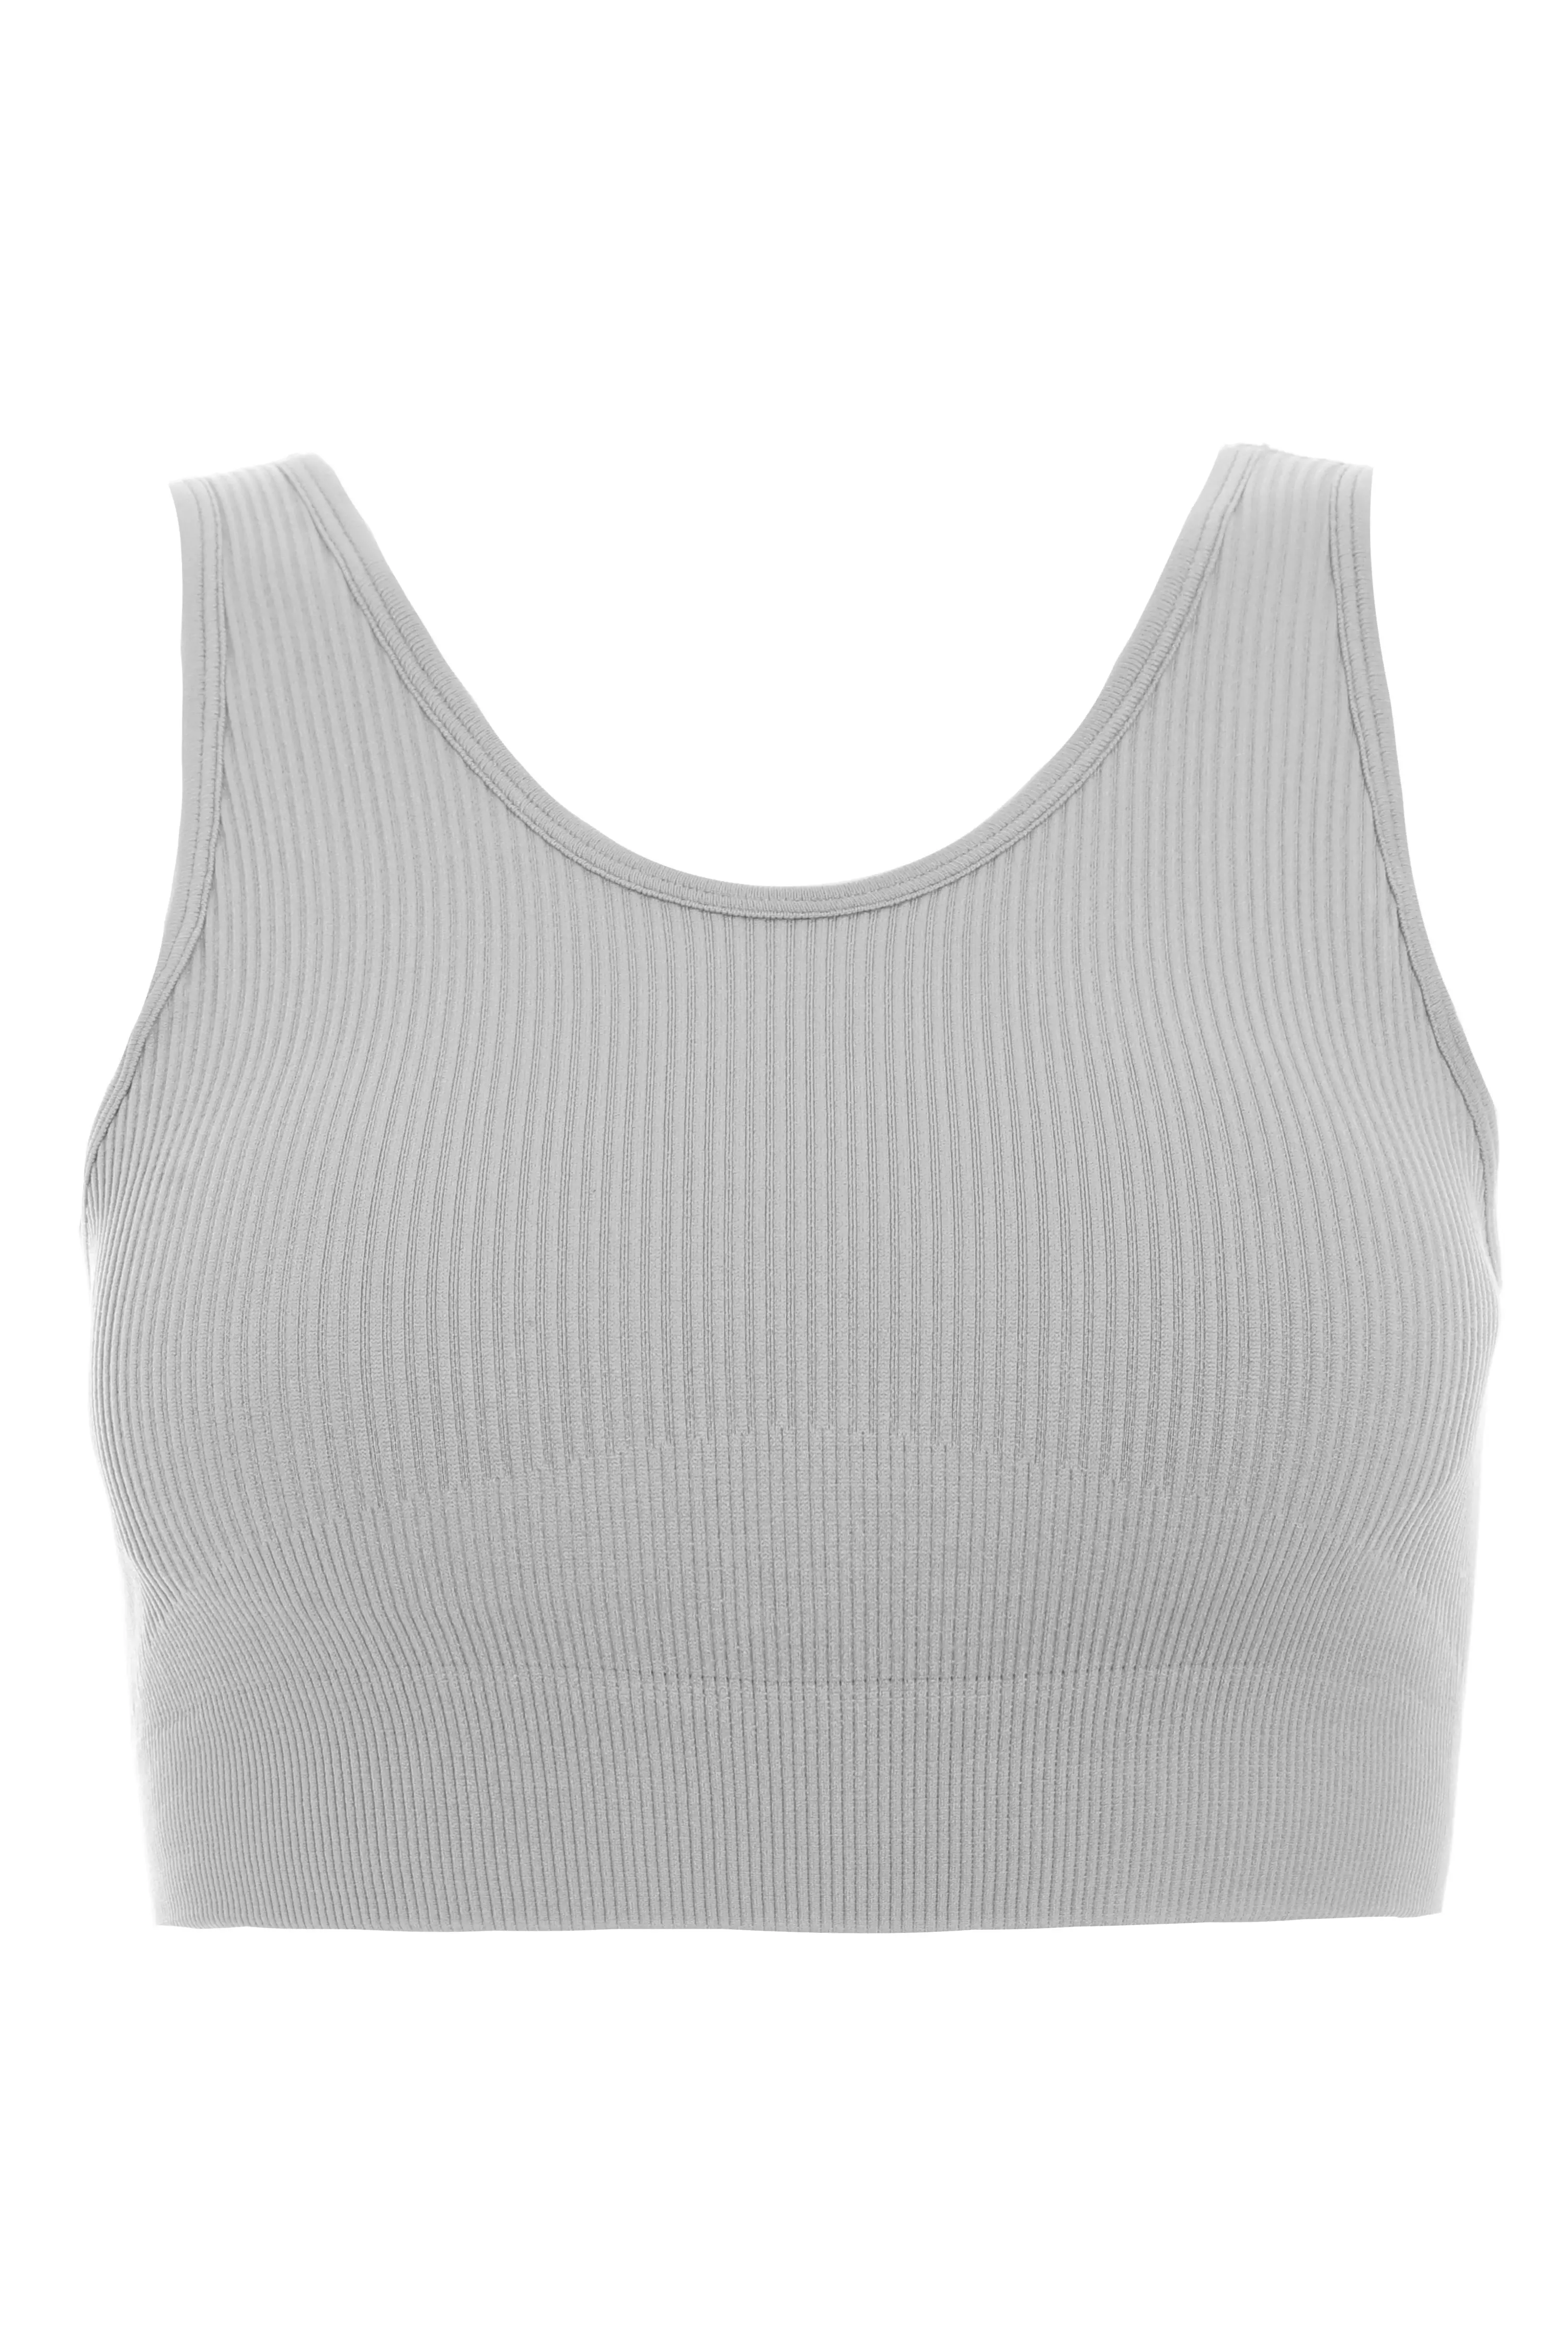 Grey Seamless Strappy Crop Top